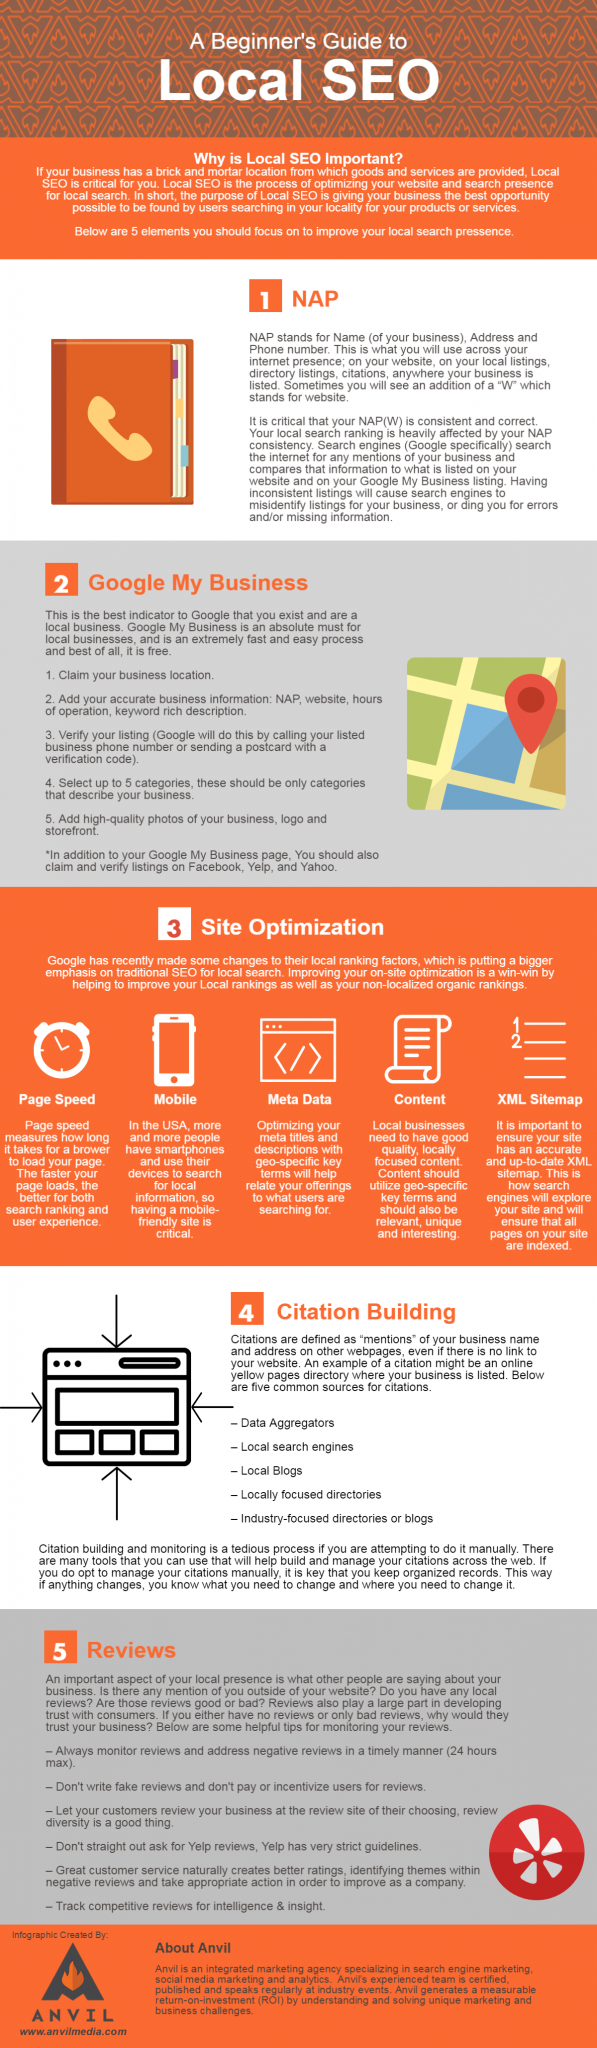 Beginner's Guide to Local SEO Infographic